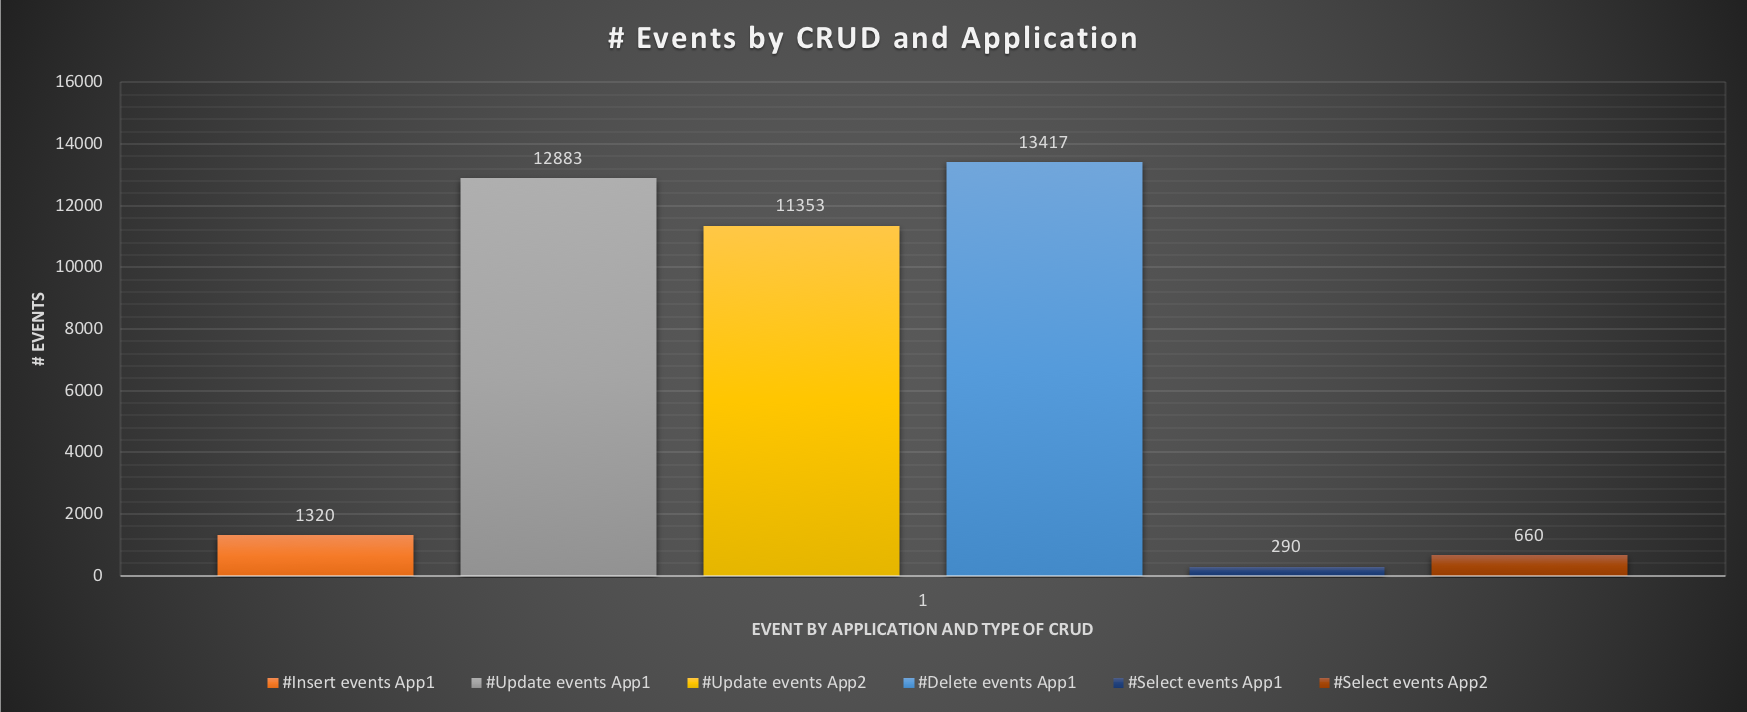 events_by_crud2